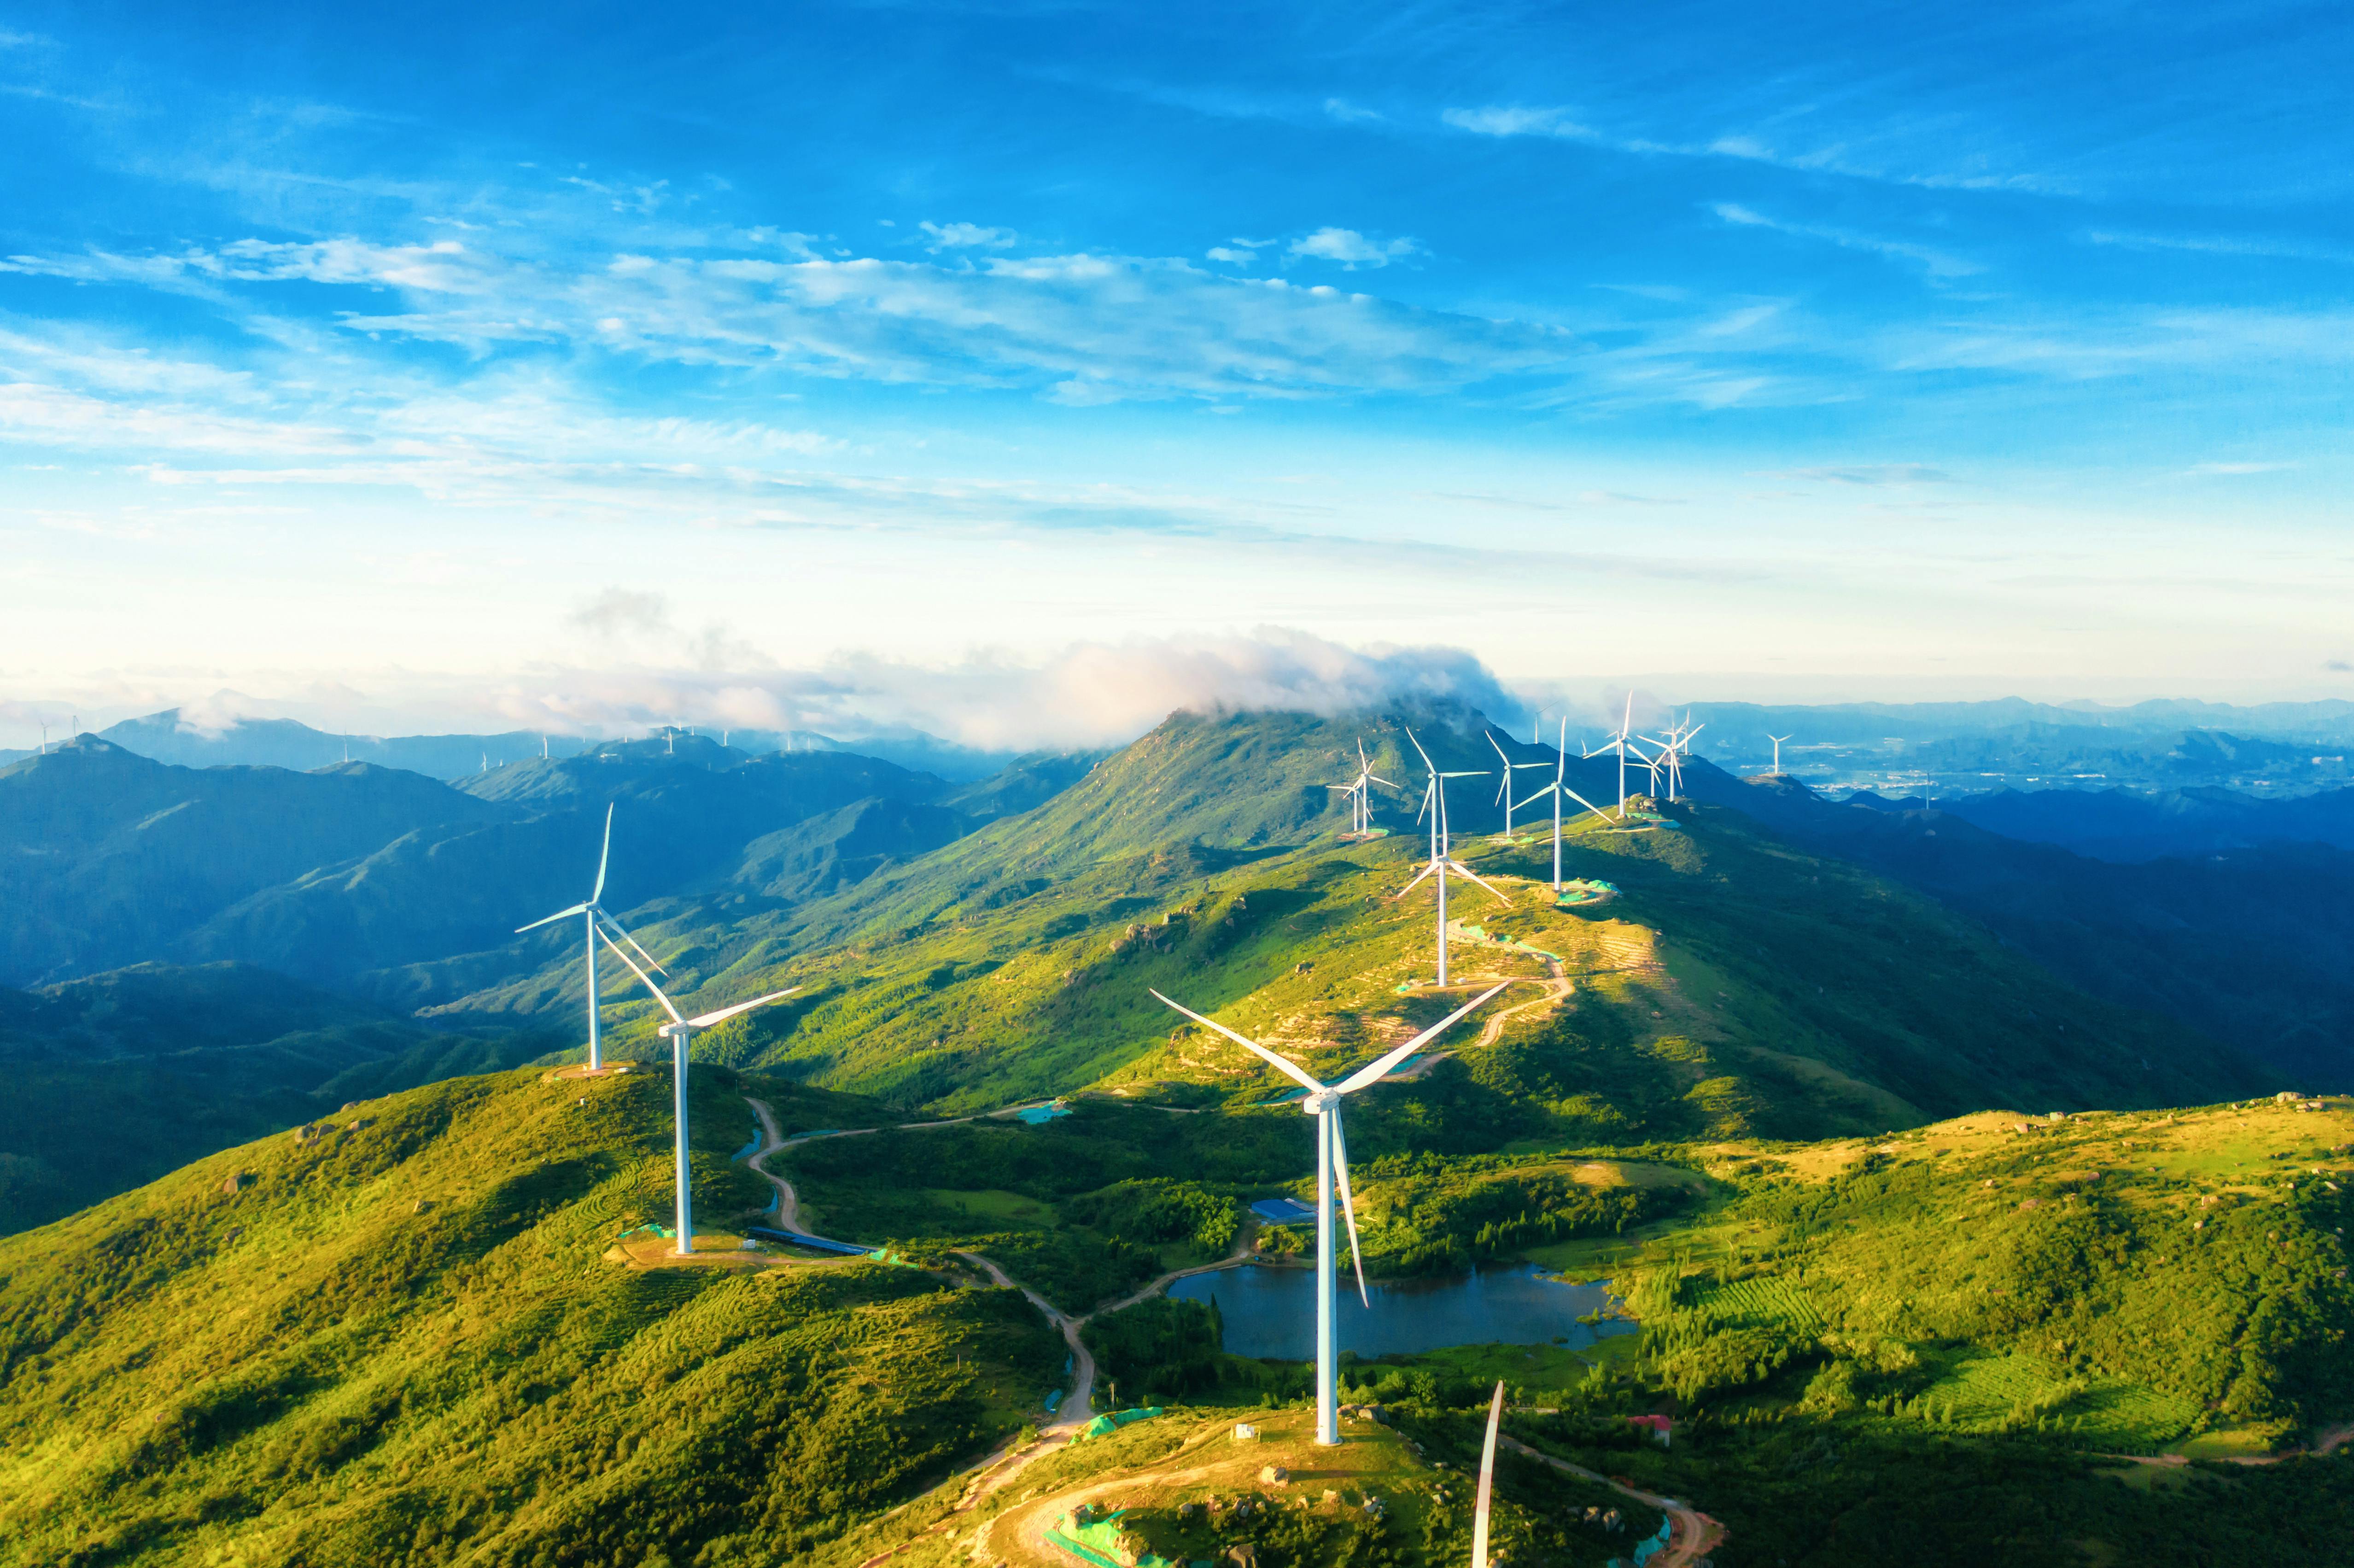 Photo depicts several modern windmills on top of a green mountain range, the windmills get smaller in the distance, the sky is bright blue with white clouds